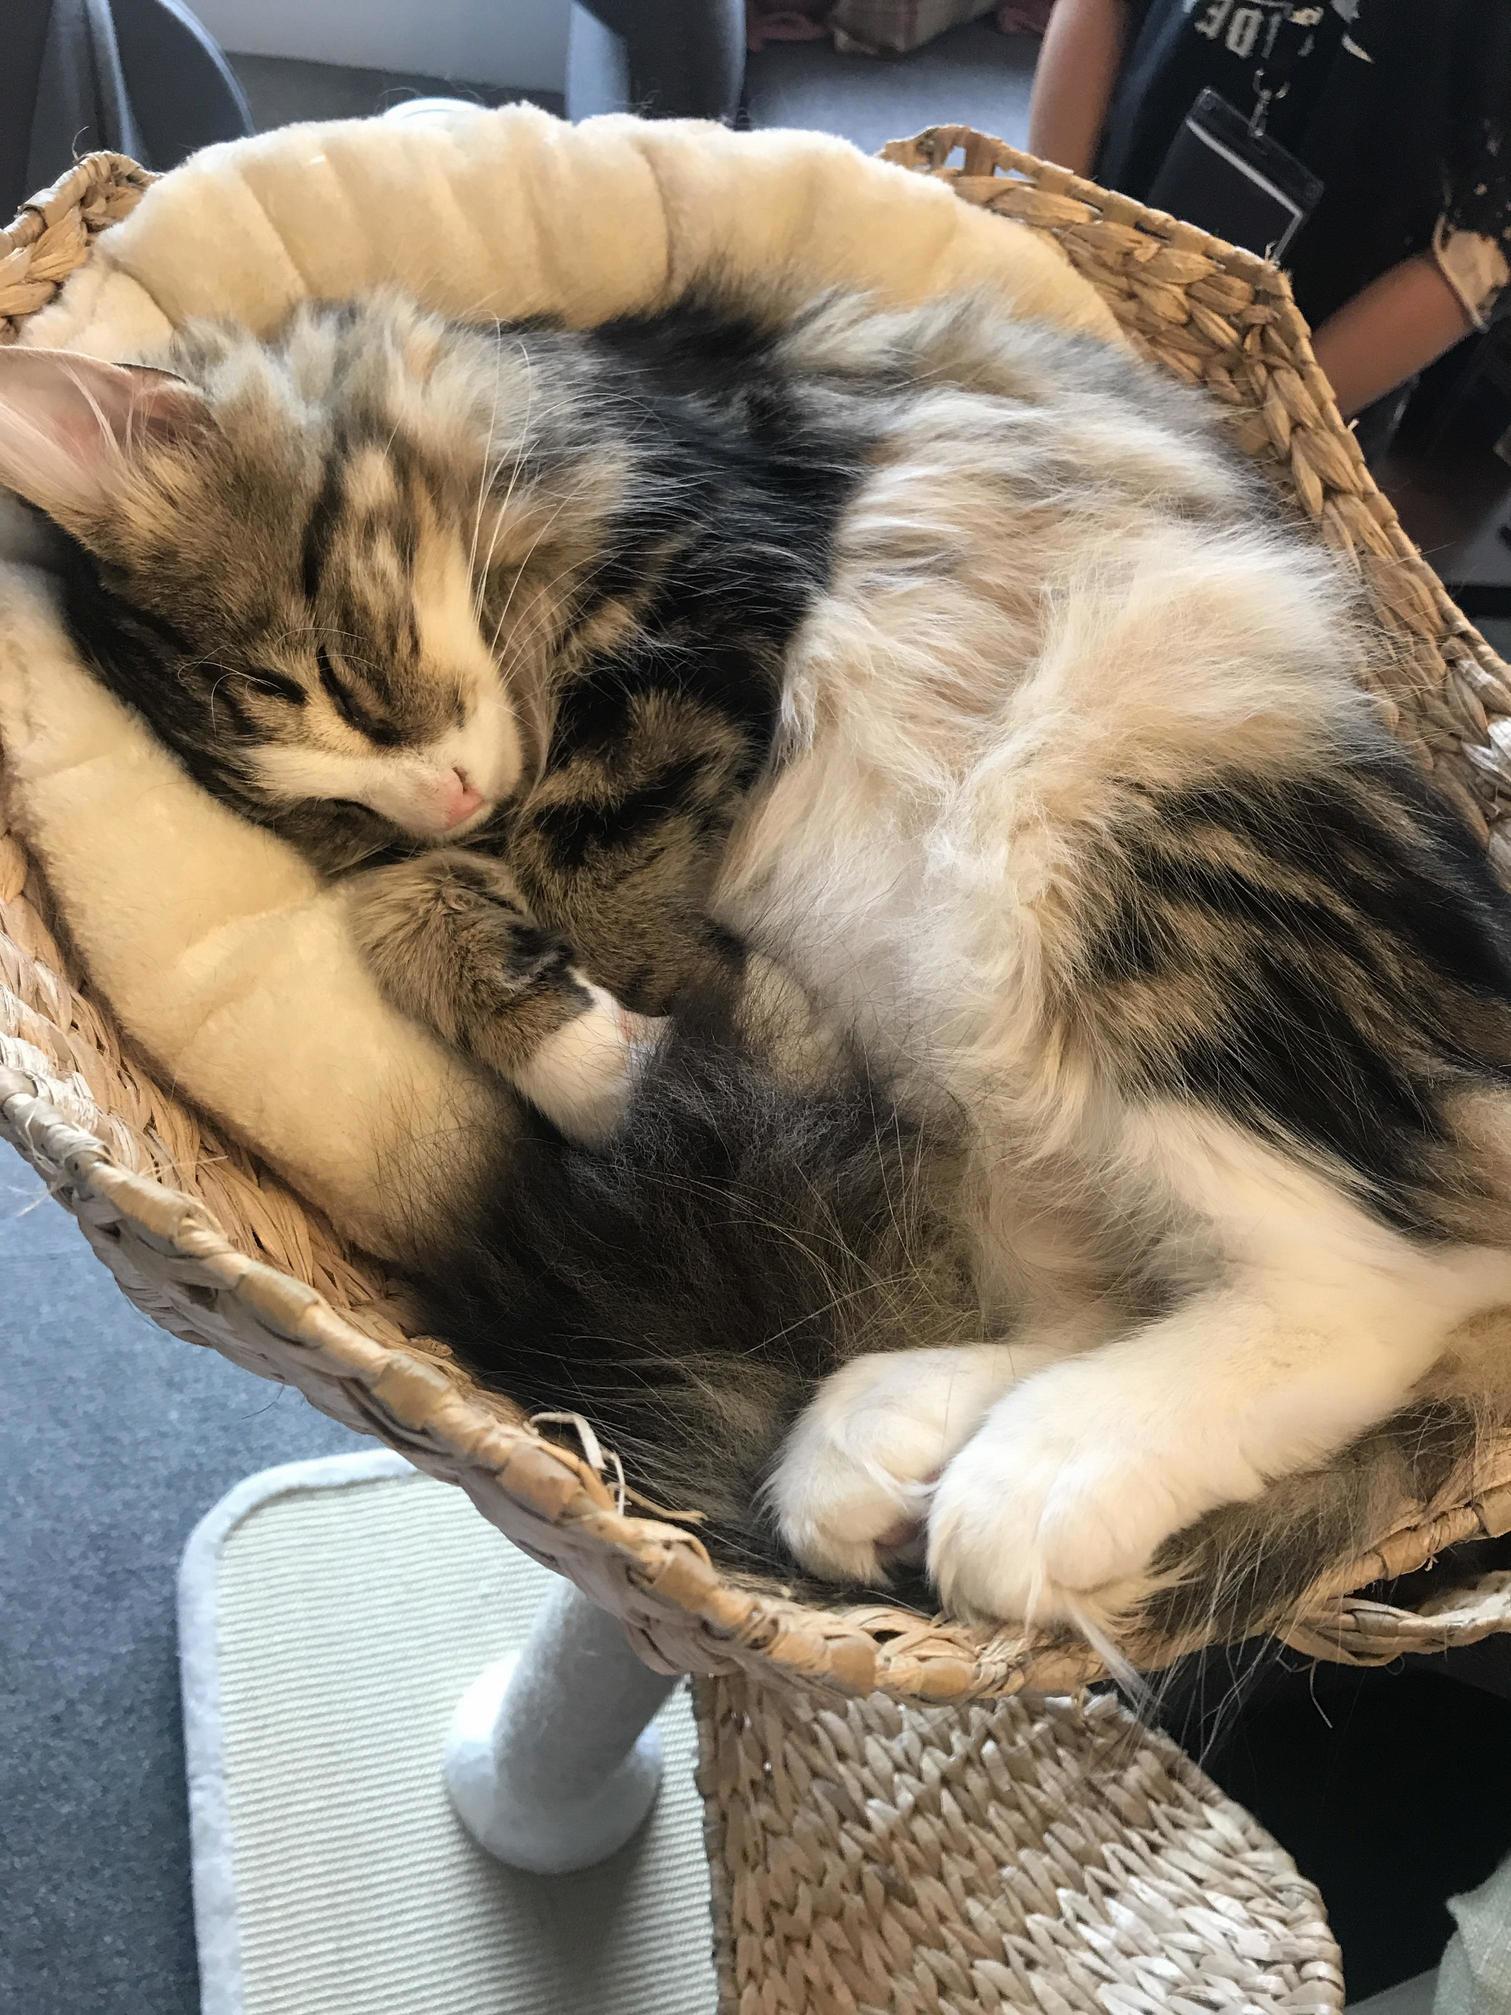 Visited liverpool cat cafe today and fell in love with this gorgeous norwegian forest cat